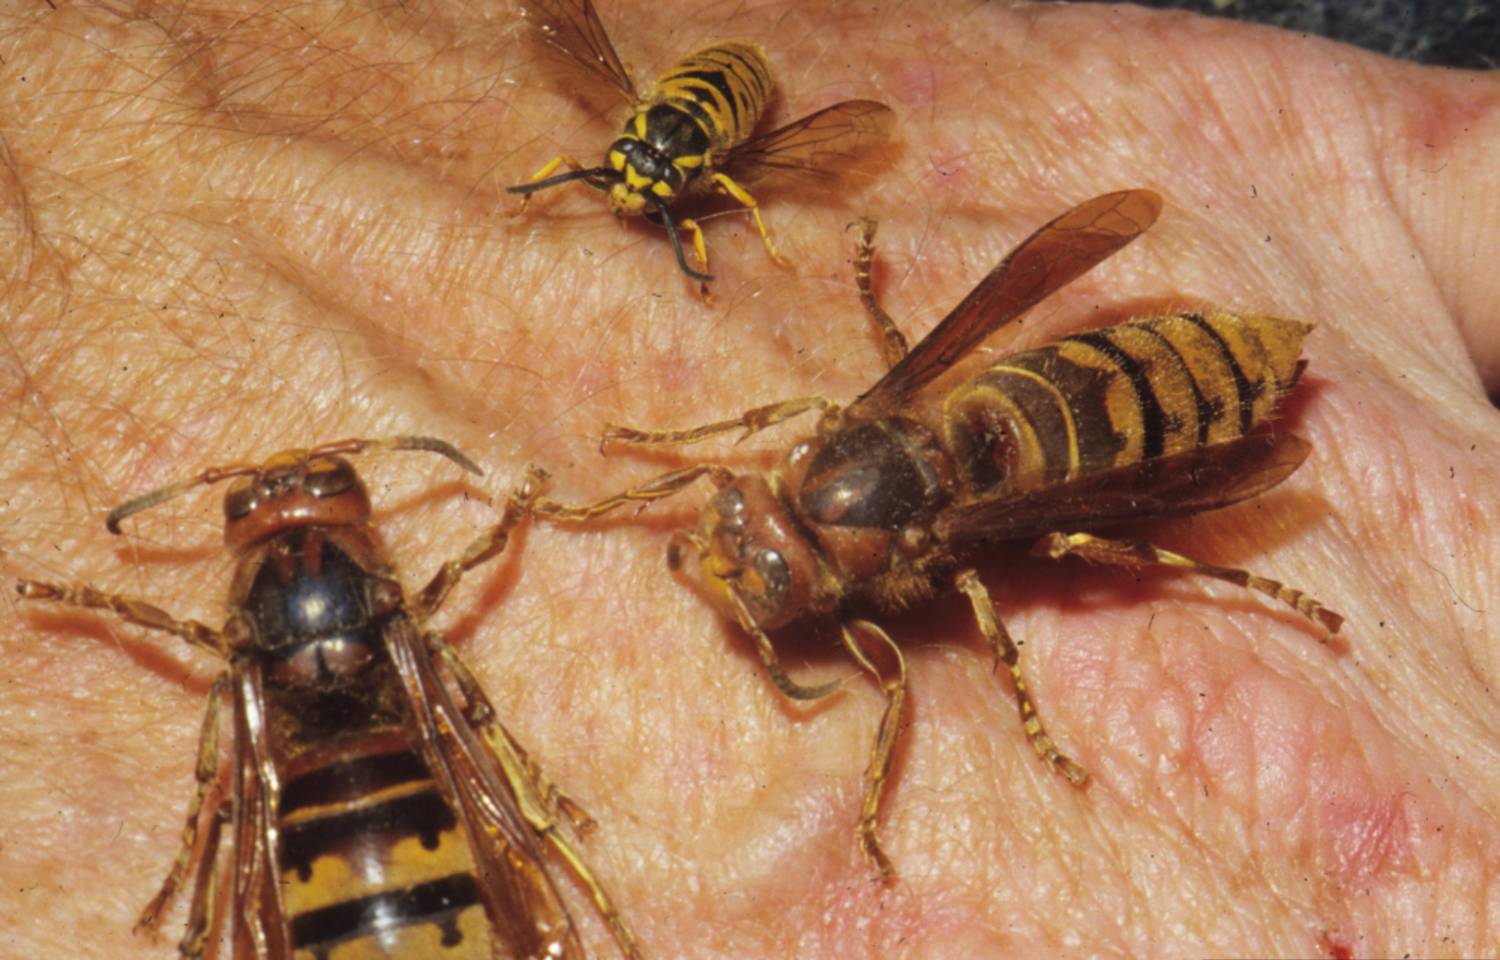 Two Asian giant hornets and one European hornet on a hand